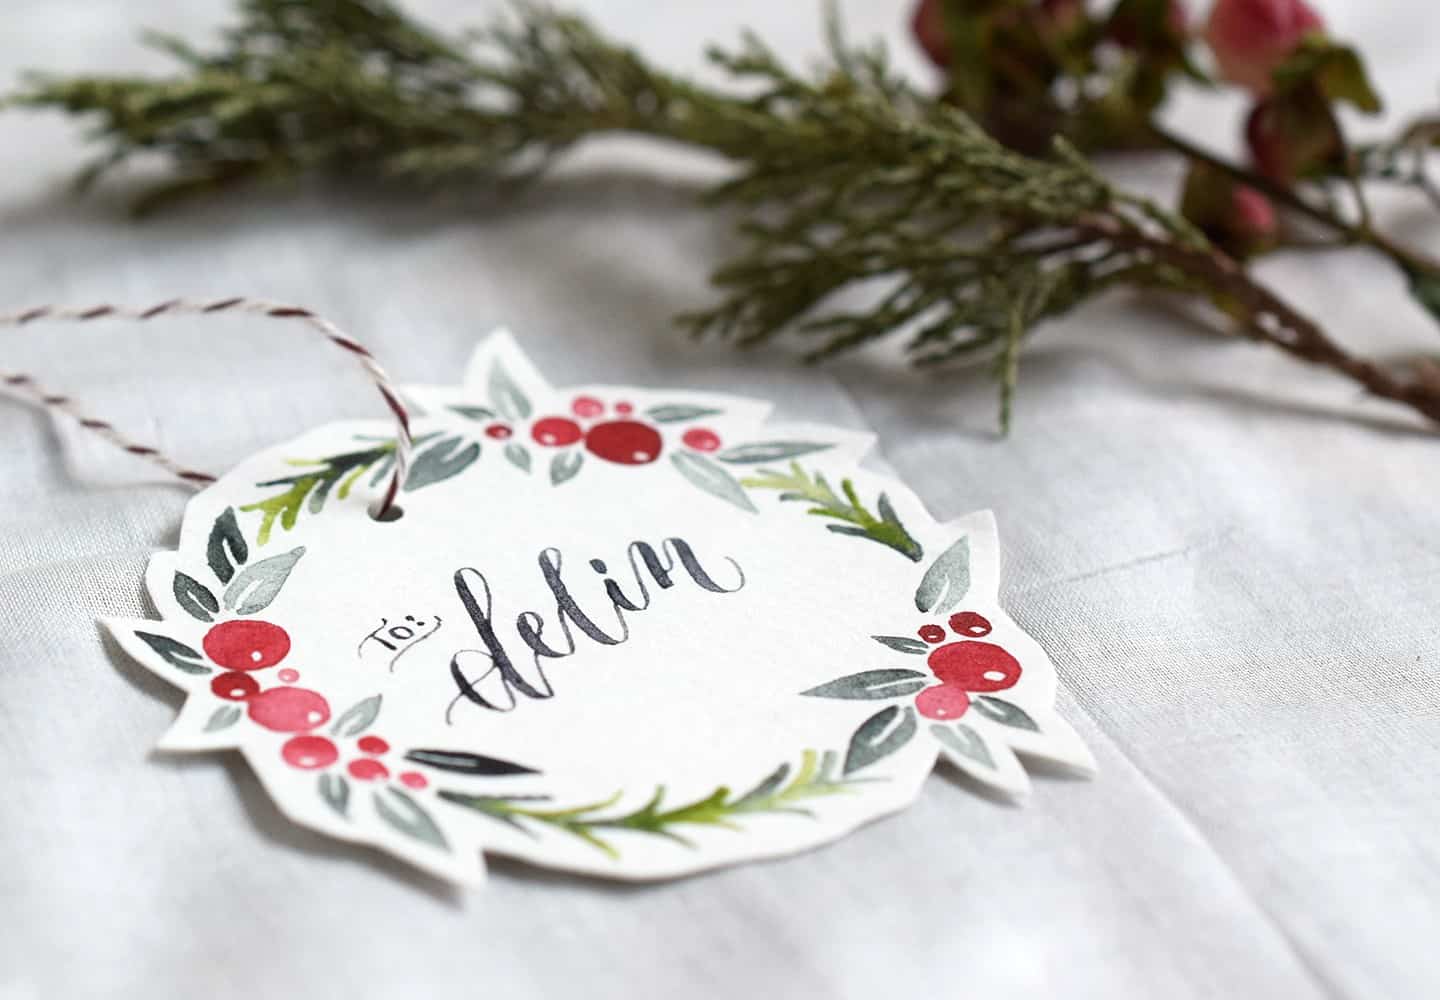 Watercolor Holiday Wreath Tutorial + Free Printable by The Postman’s Knock